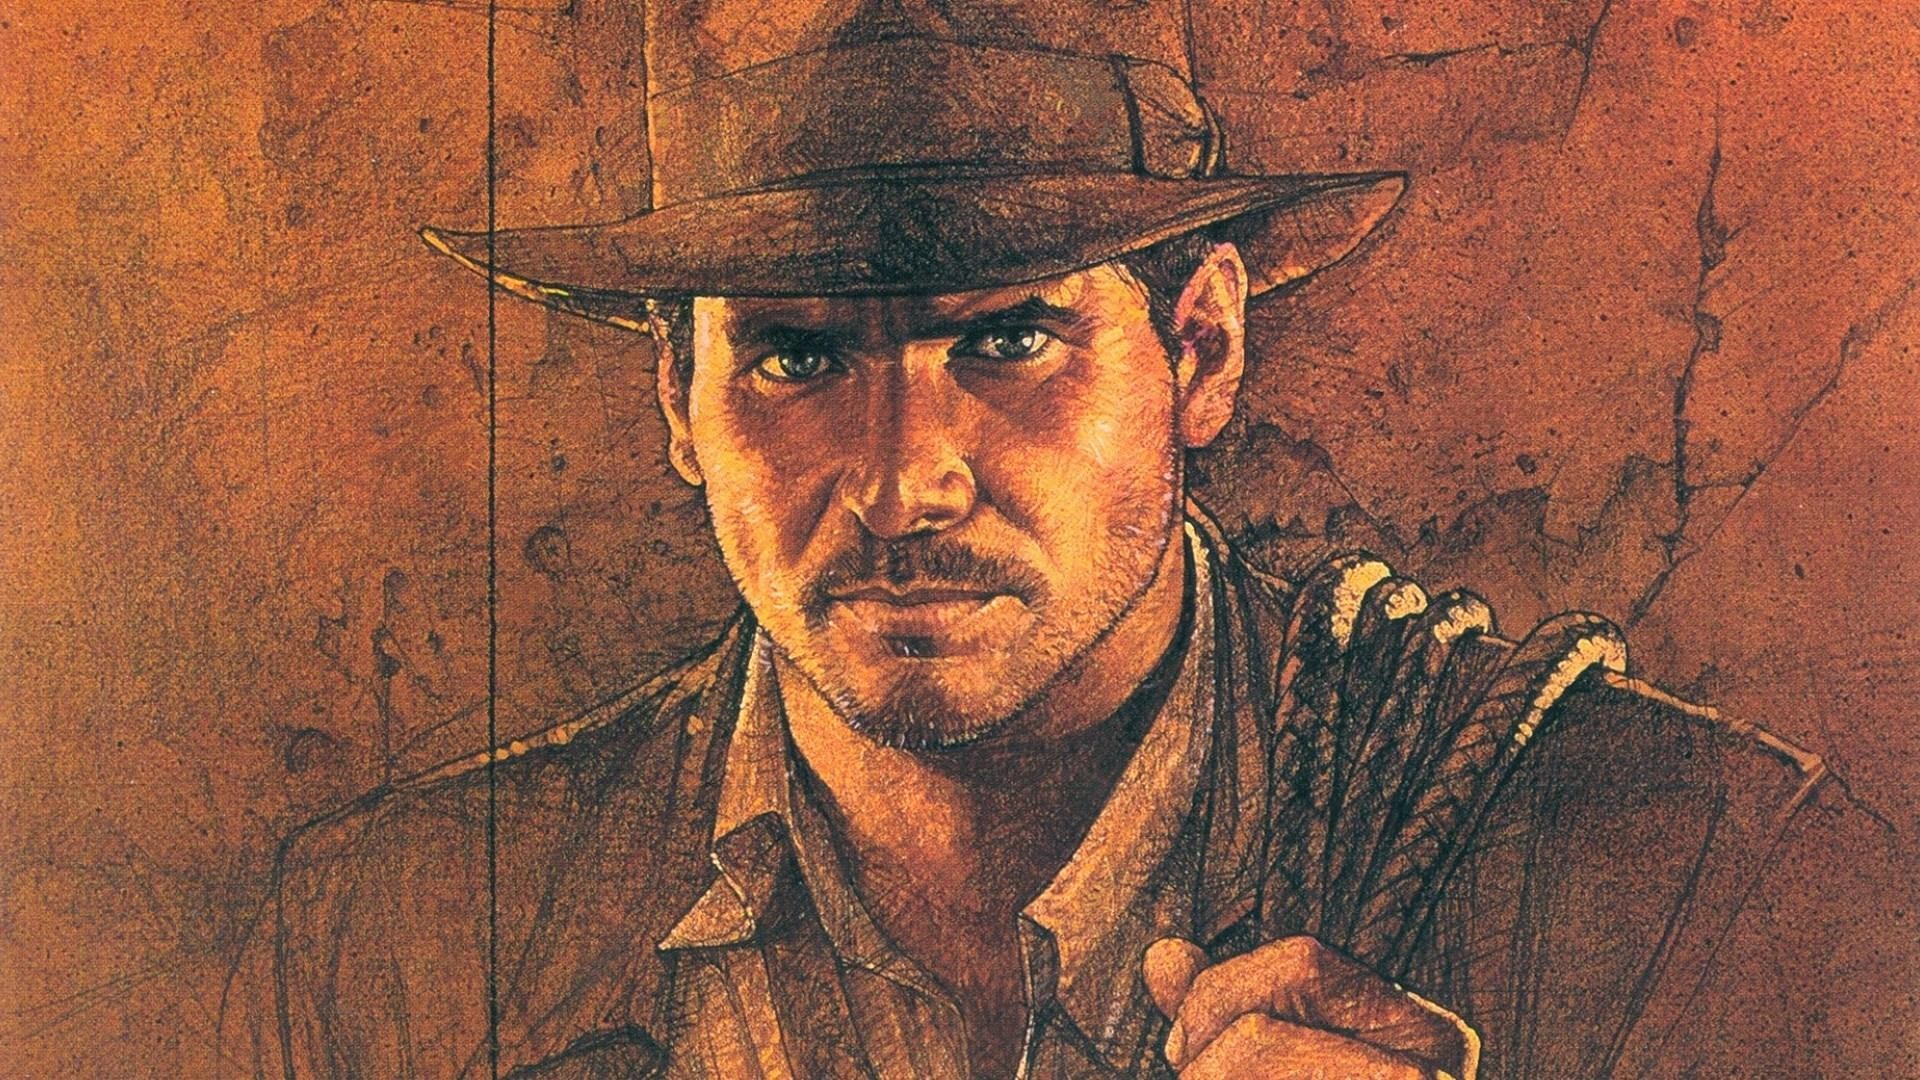 Movies Indiana Jones Harrison Ford Wallpapers Hd Desktop And Mobile Backgrounds